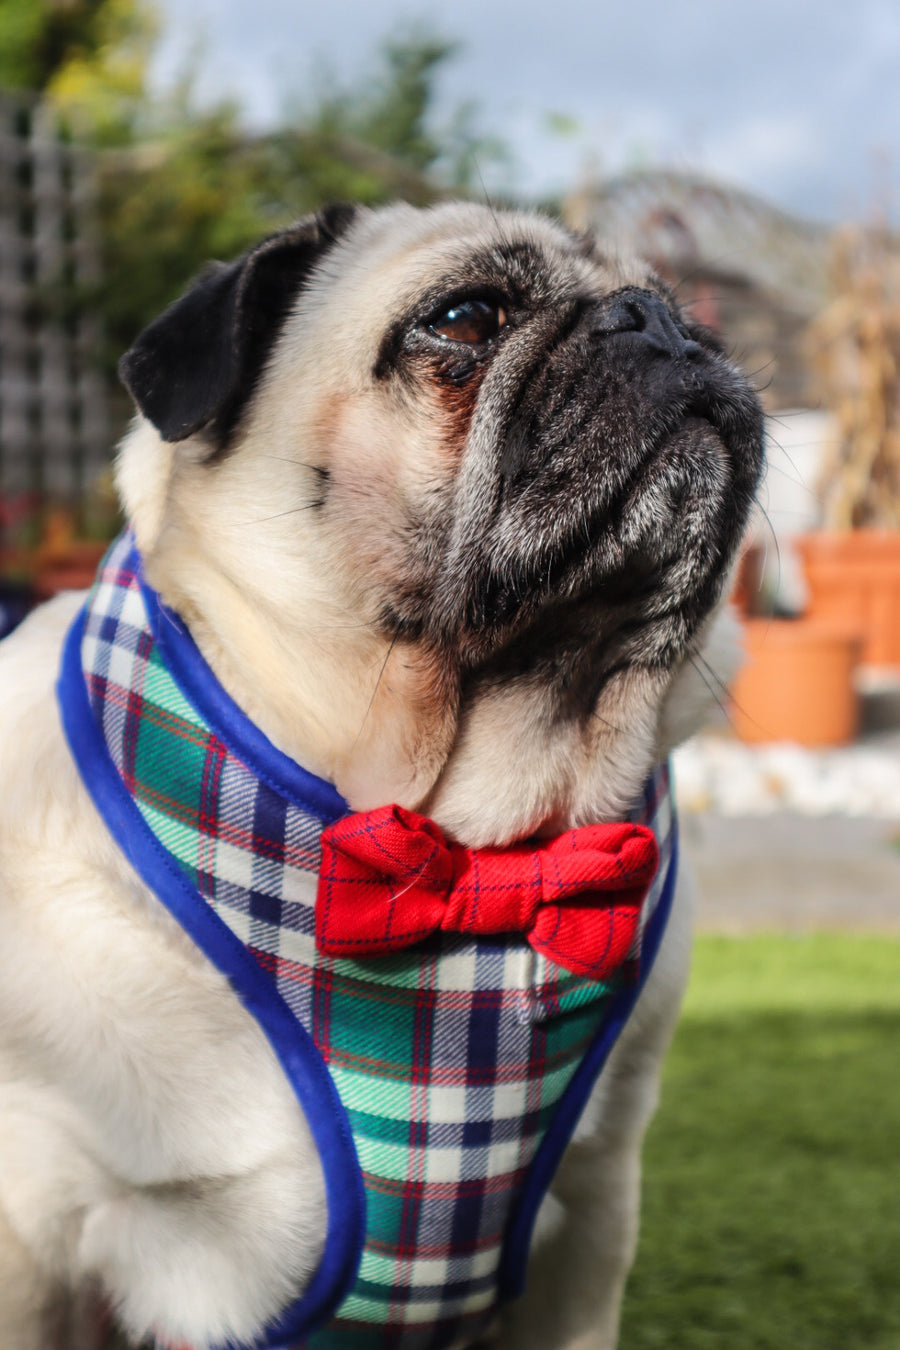 Sir Darwin - Hand-made, luxury plaid harness with bow-tie, pocket and bone button – XS, S, M, L & Custom